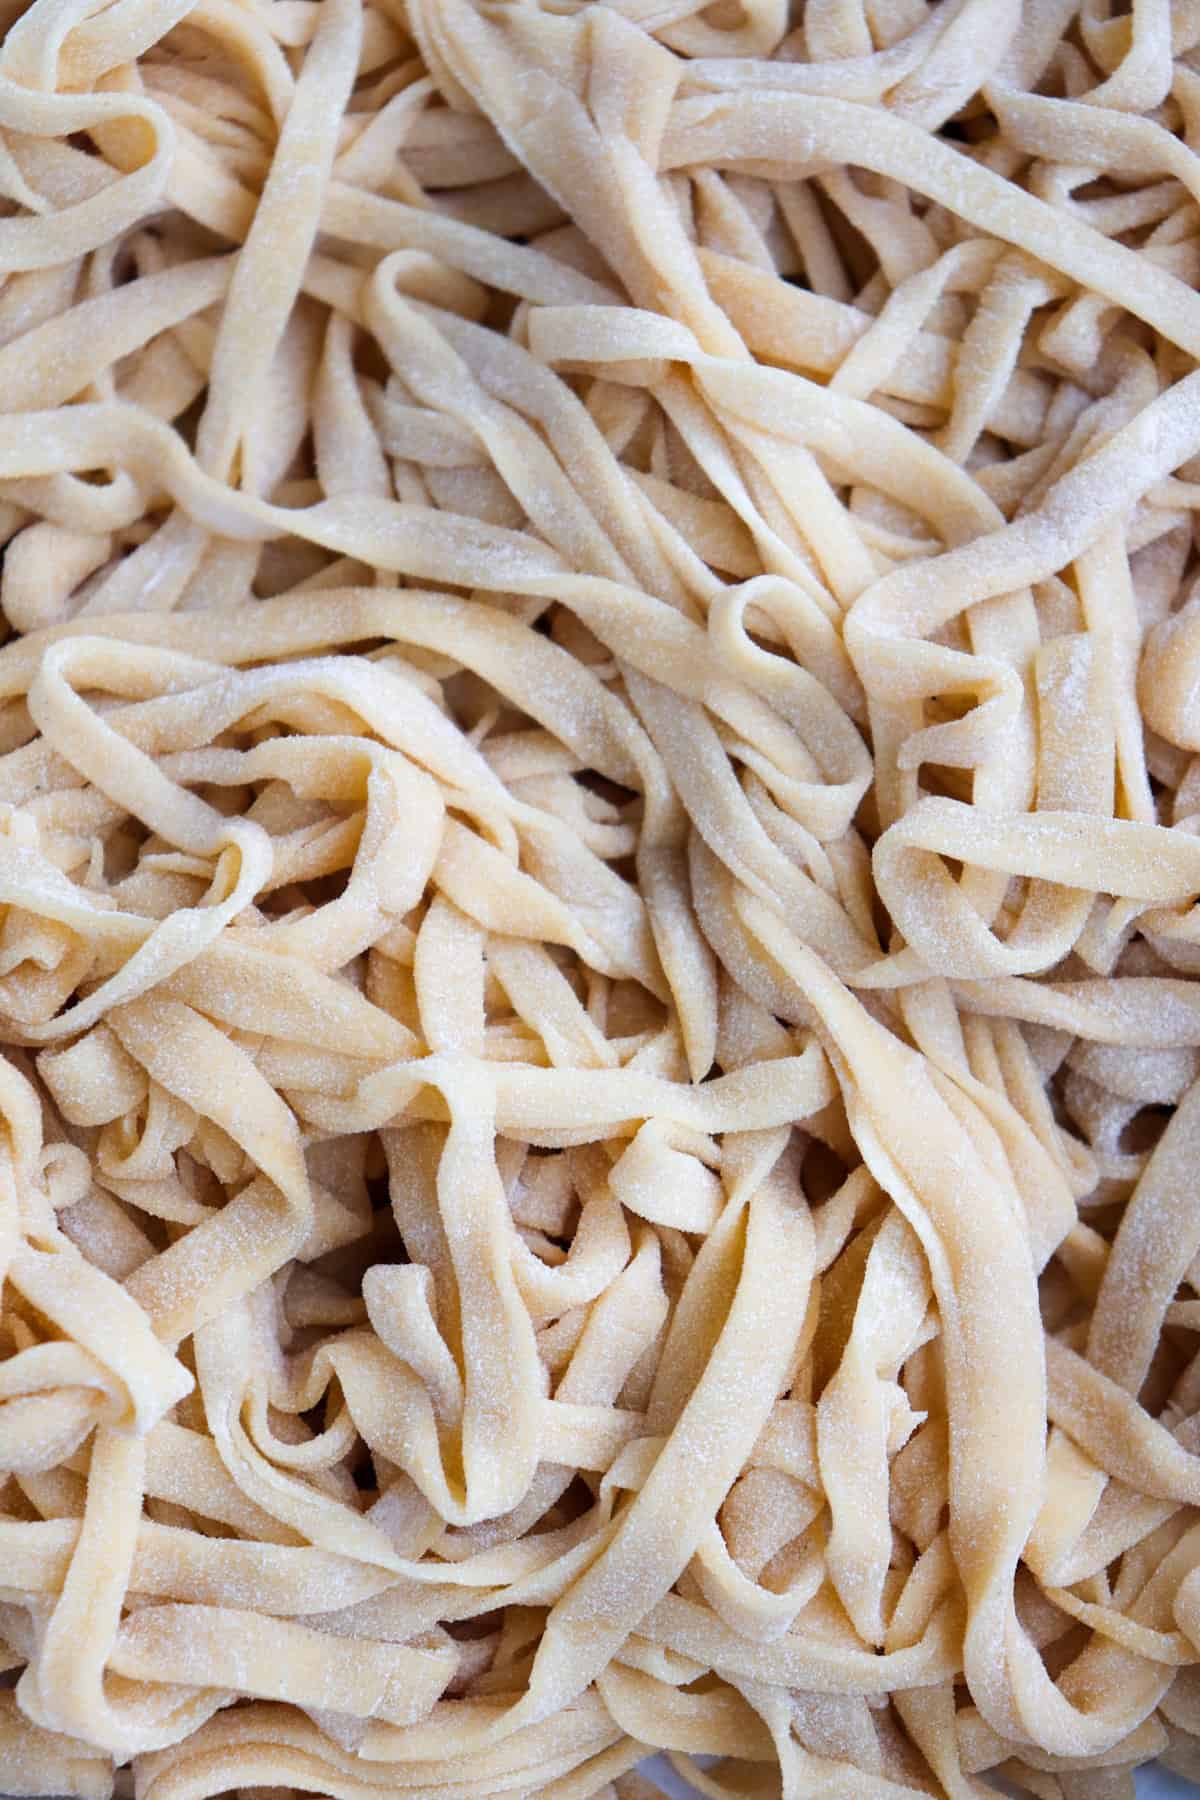 up close of lots of noodles.